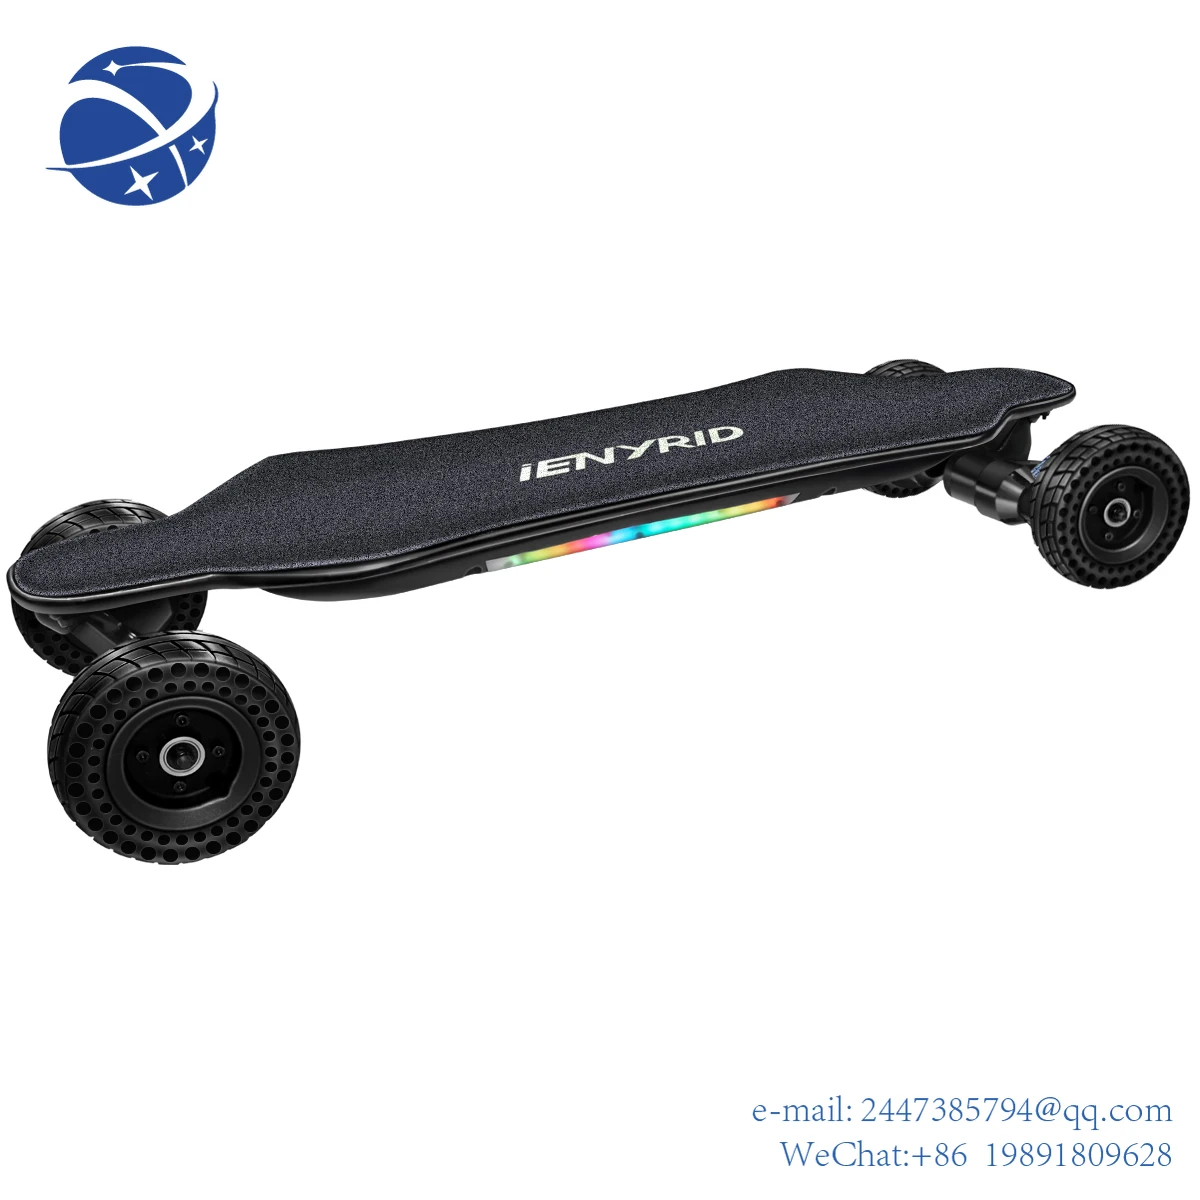 Yun YiUSA warehouse 4 wheel Electric SUV-skateboard Fast delivery time FCC ROHS CE electric skateboard is best the warehouse